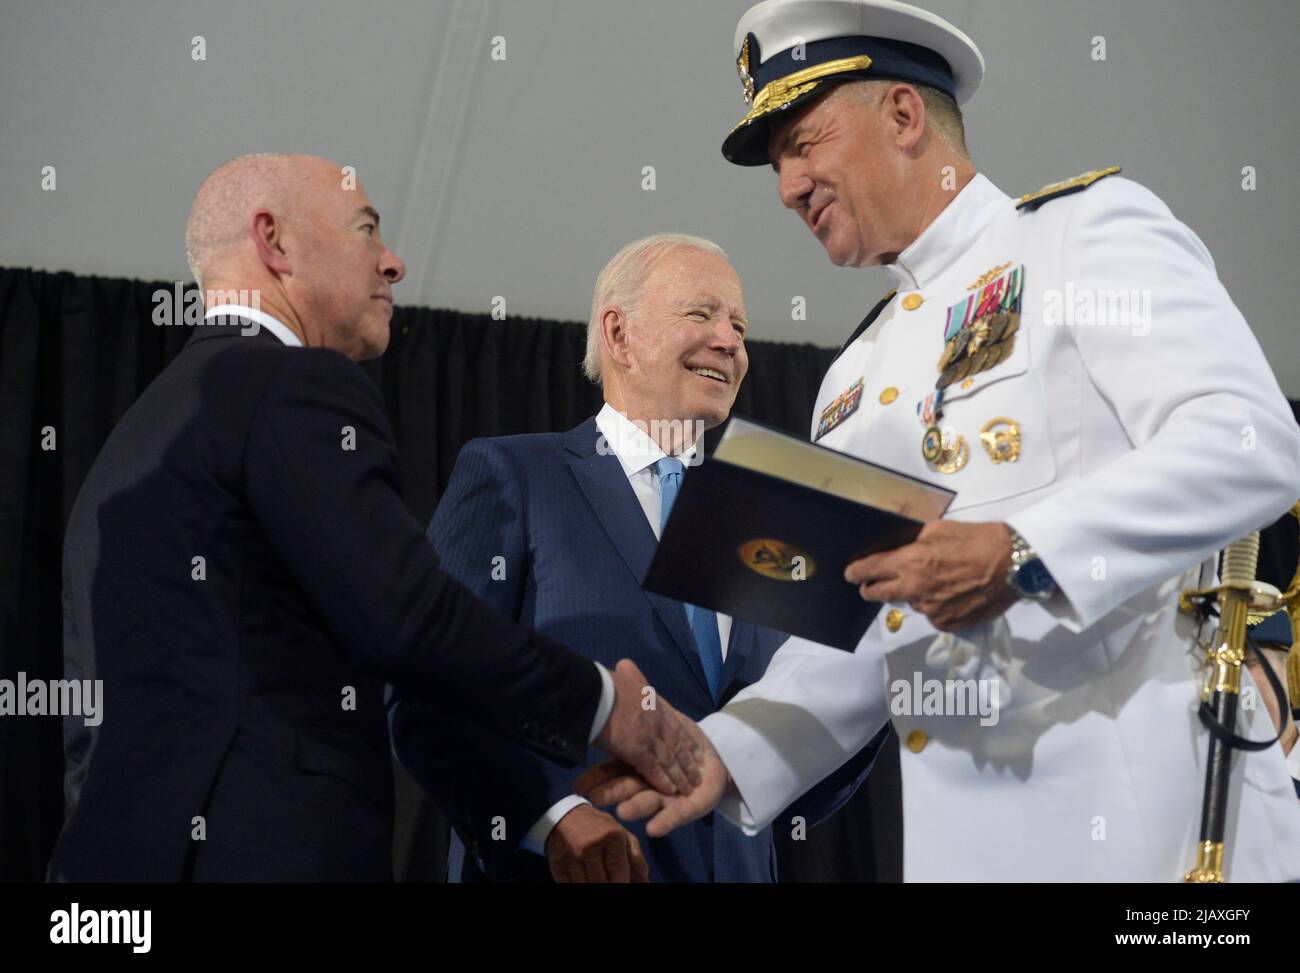 Washington, United States. 01st June, 2022. U.S. Coast Guard Adm. Karl L. Schultz shakes hand with President Joe Biden and Homeland Security Secretary Alejandro Mayorkas (L) during a change of command ceremony at Coast Guard Headquarters in Washington, DC on Wednesday, June 1, 2022. Coast Guard Adm. Linda Fagan is taking over command from Schultz. Photo by Bonnie Cash/Pool/Sipa USA Credit: Sipa USA/Alamy Live News Stock Photo